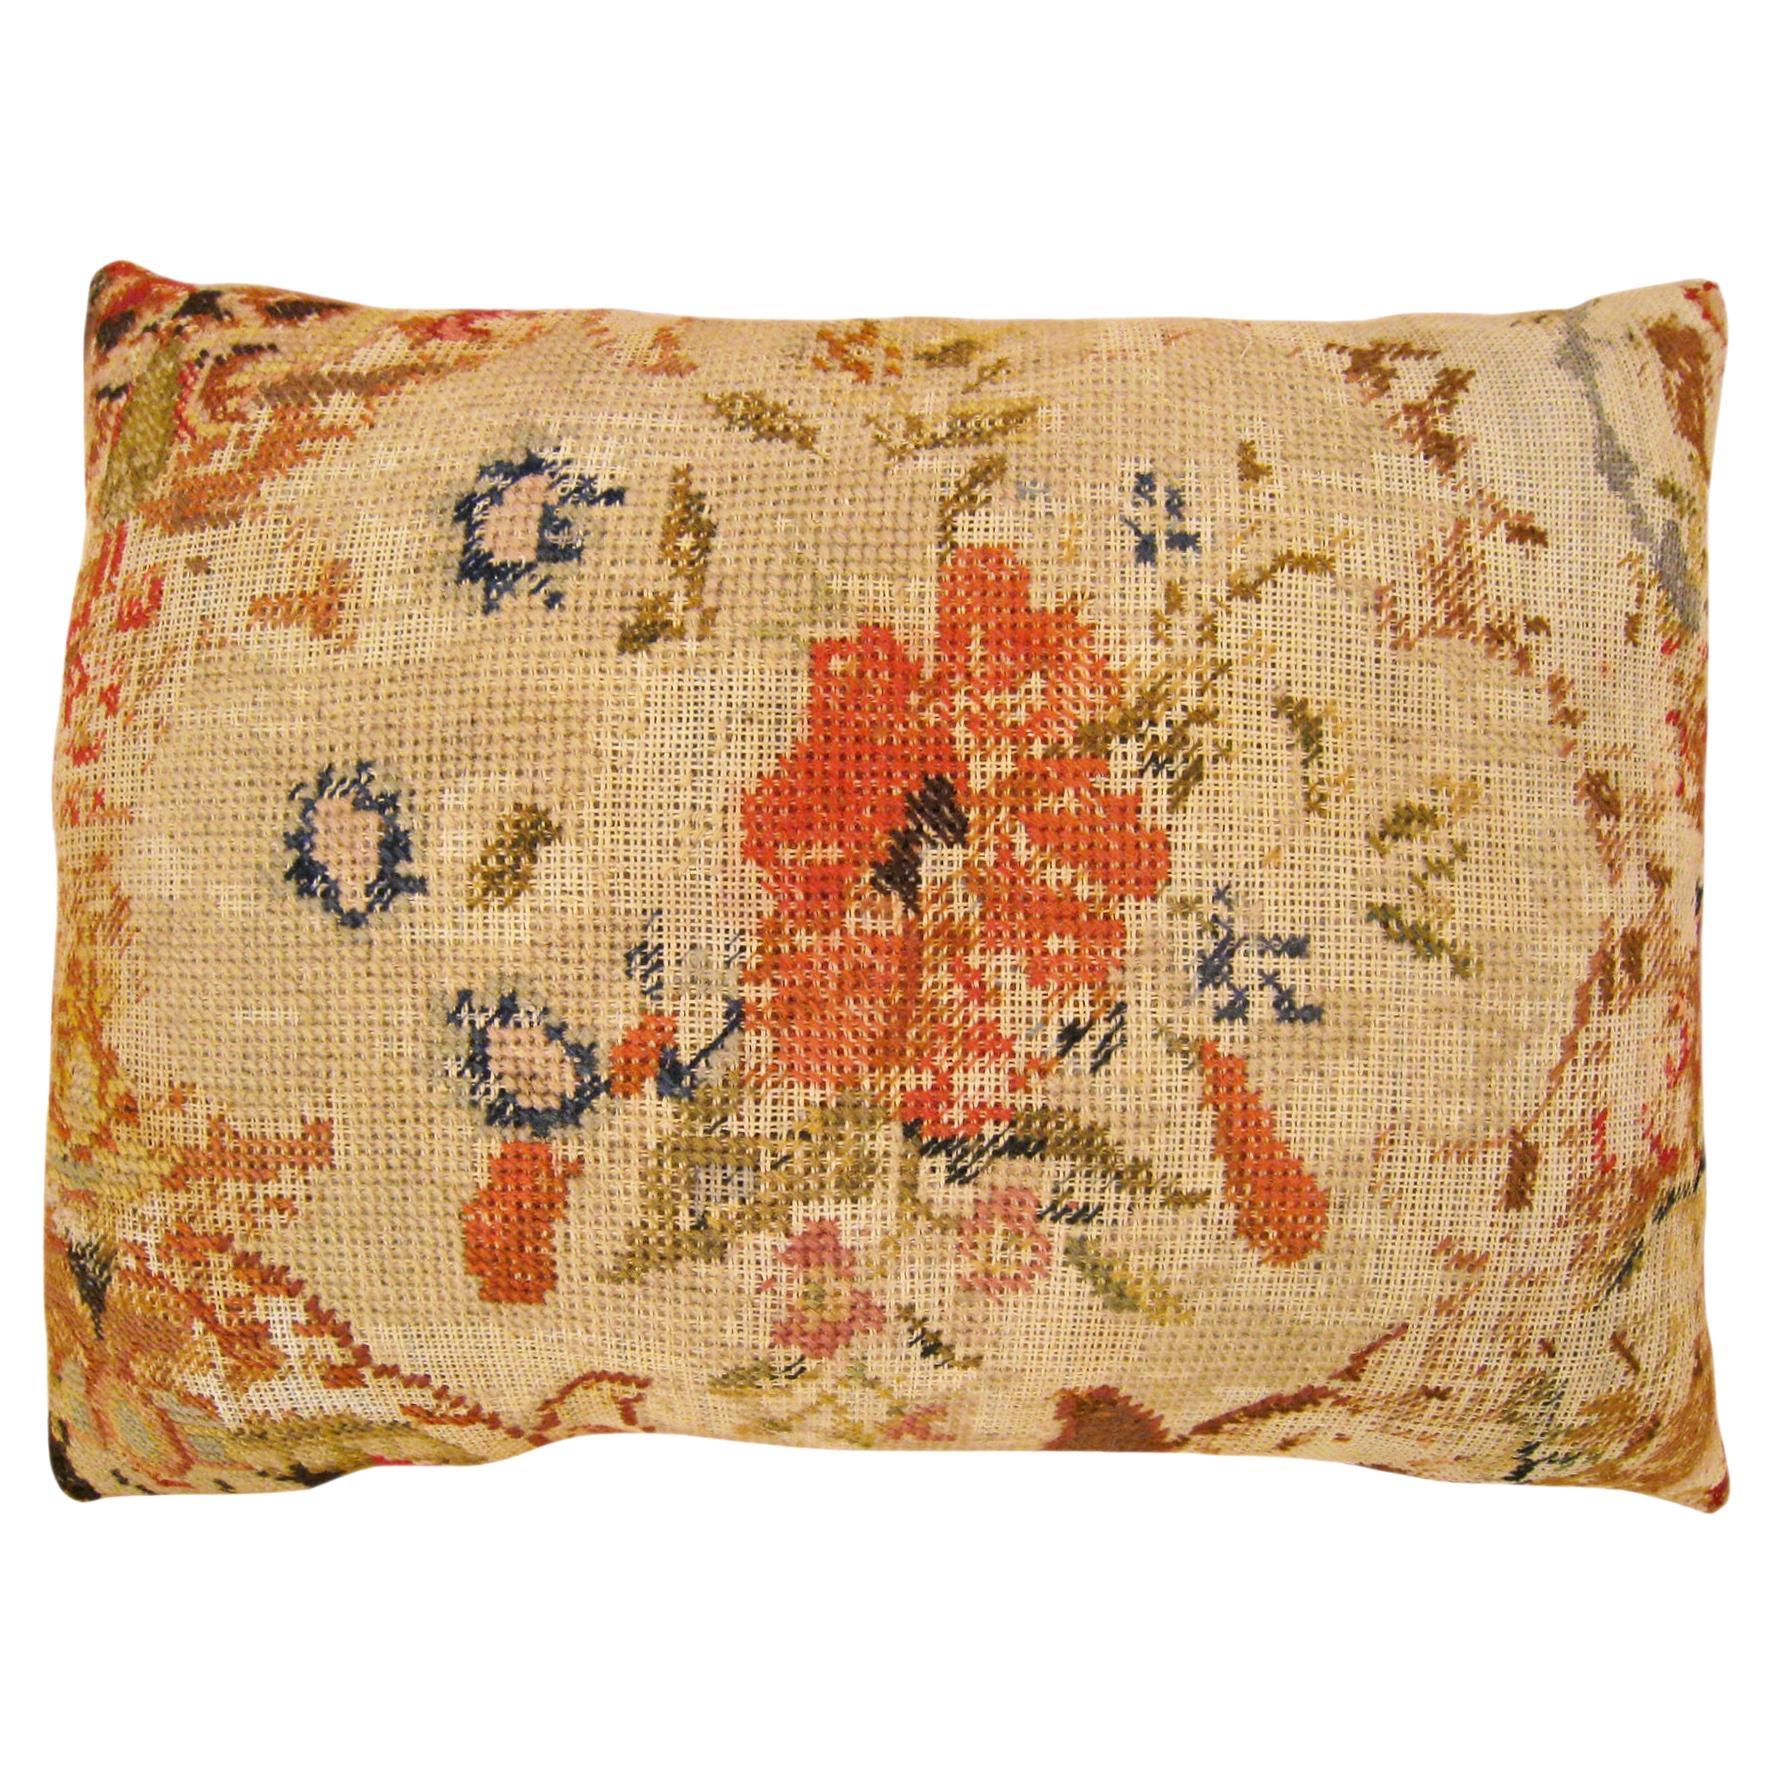 Antique Decorative English Needlepoint Rug Pillow with Floral Elements